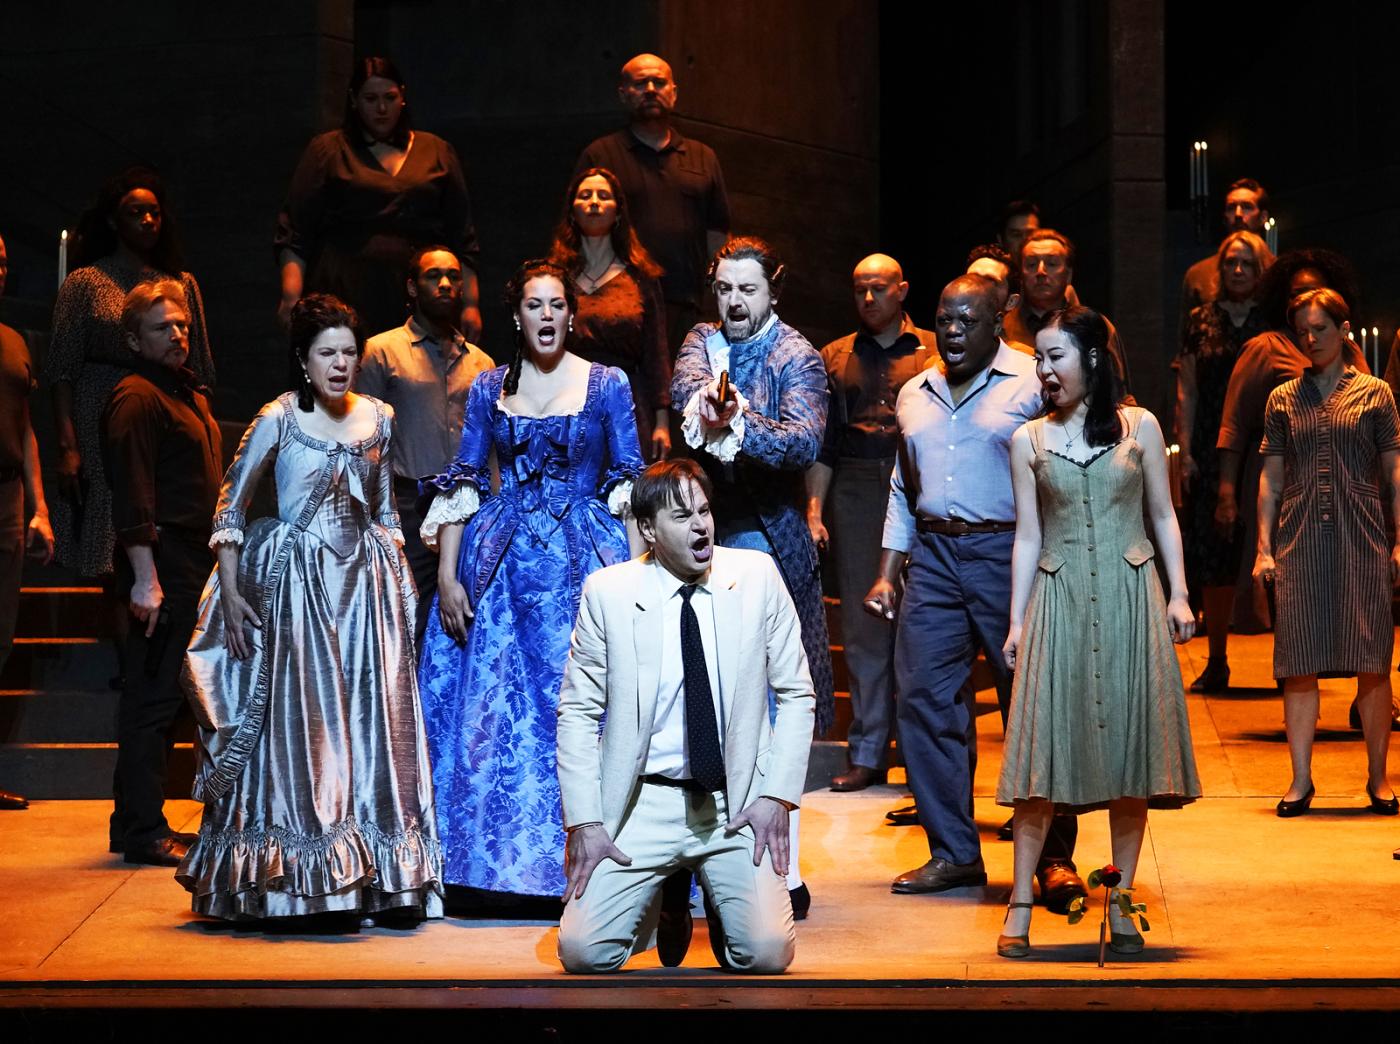 A scene from Mozart's "Don Giovanni" with Ana María Martínez as Donna Elvira, Federica Lombardi as Donna Anna, Peter Mattei (kneeling) as Don Giovanni, Ben Bliss as Don Ottavio, Alfred Walker as Masetto, and Ying Fang as Zerlina. Photo: Karen Almond / Met Opera